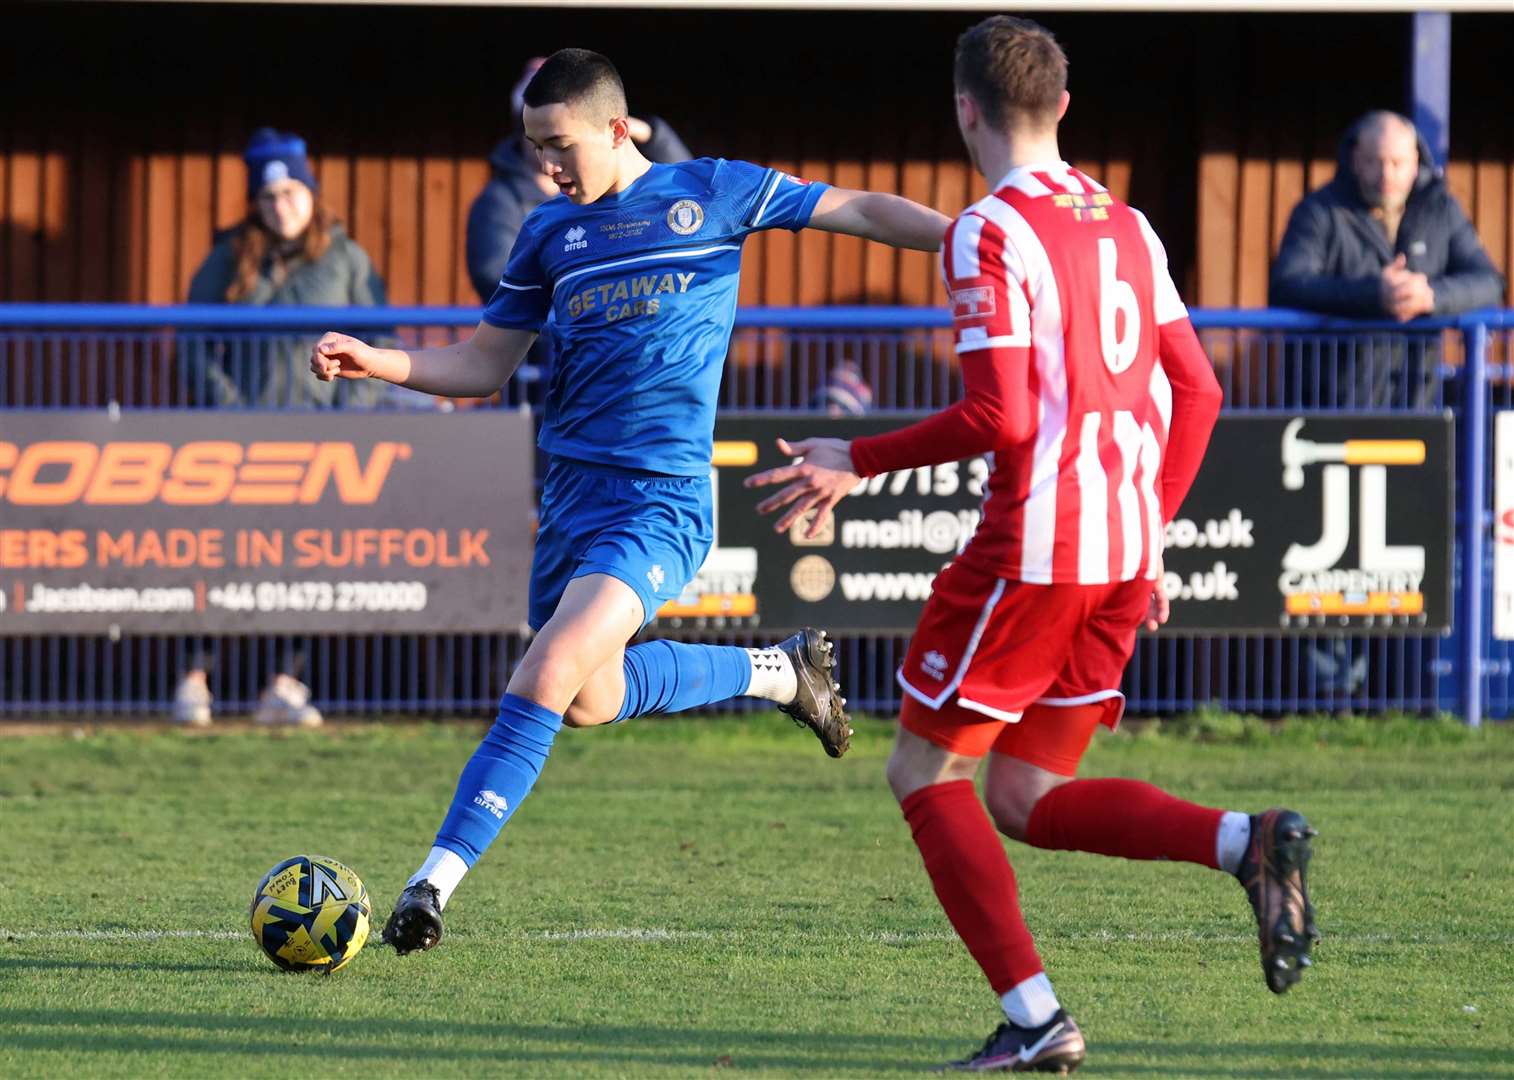 Ollie Yun crosses for Bury Town in the first half Picture: Richard Marsham